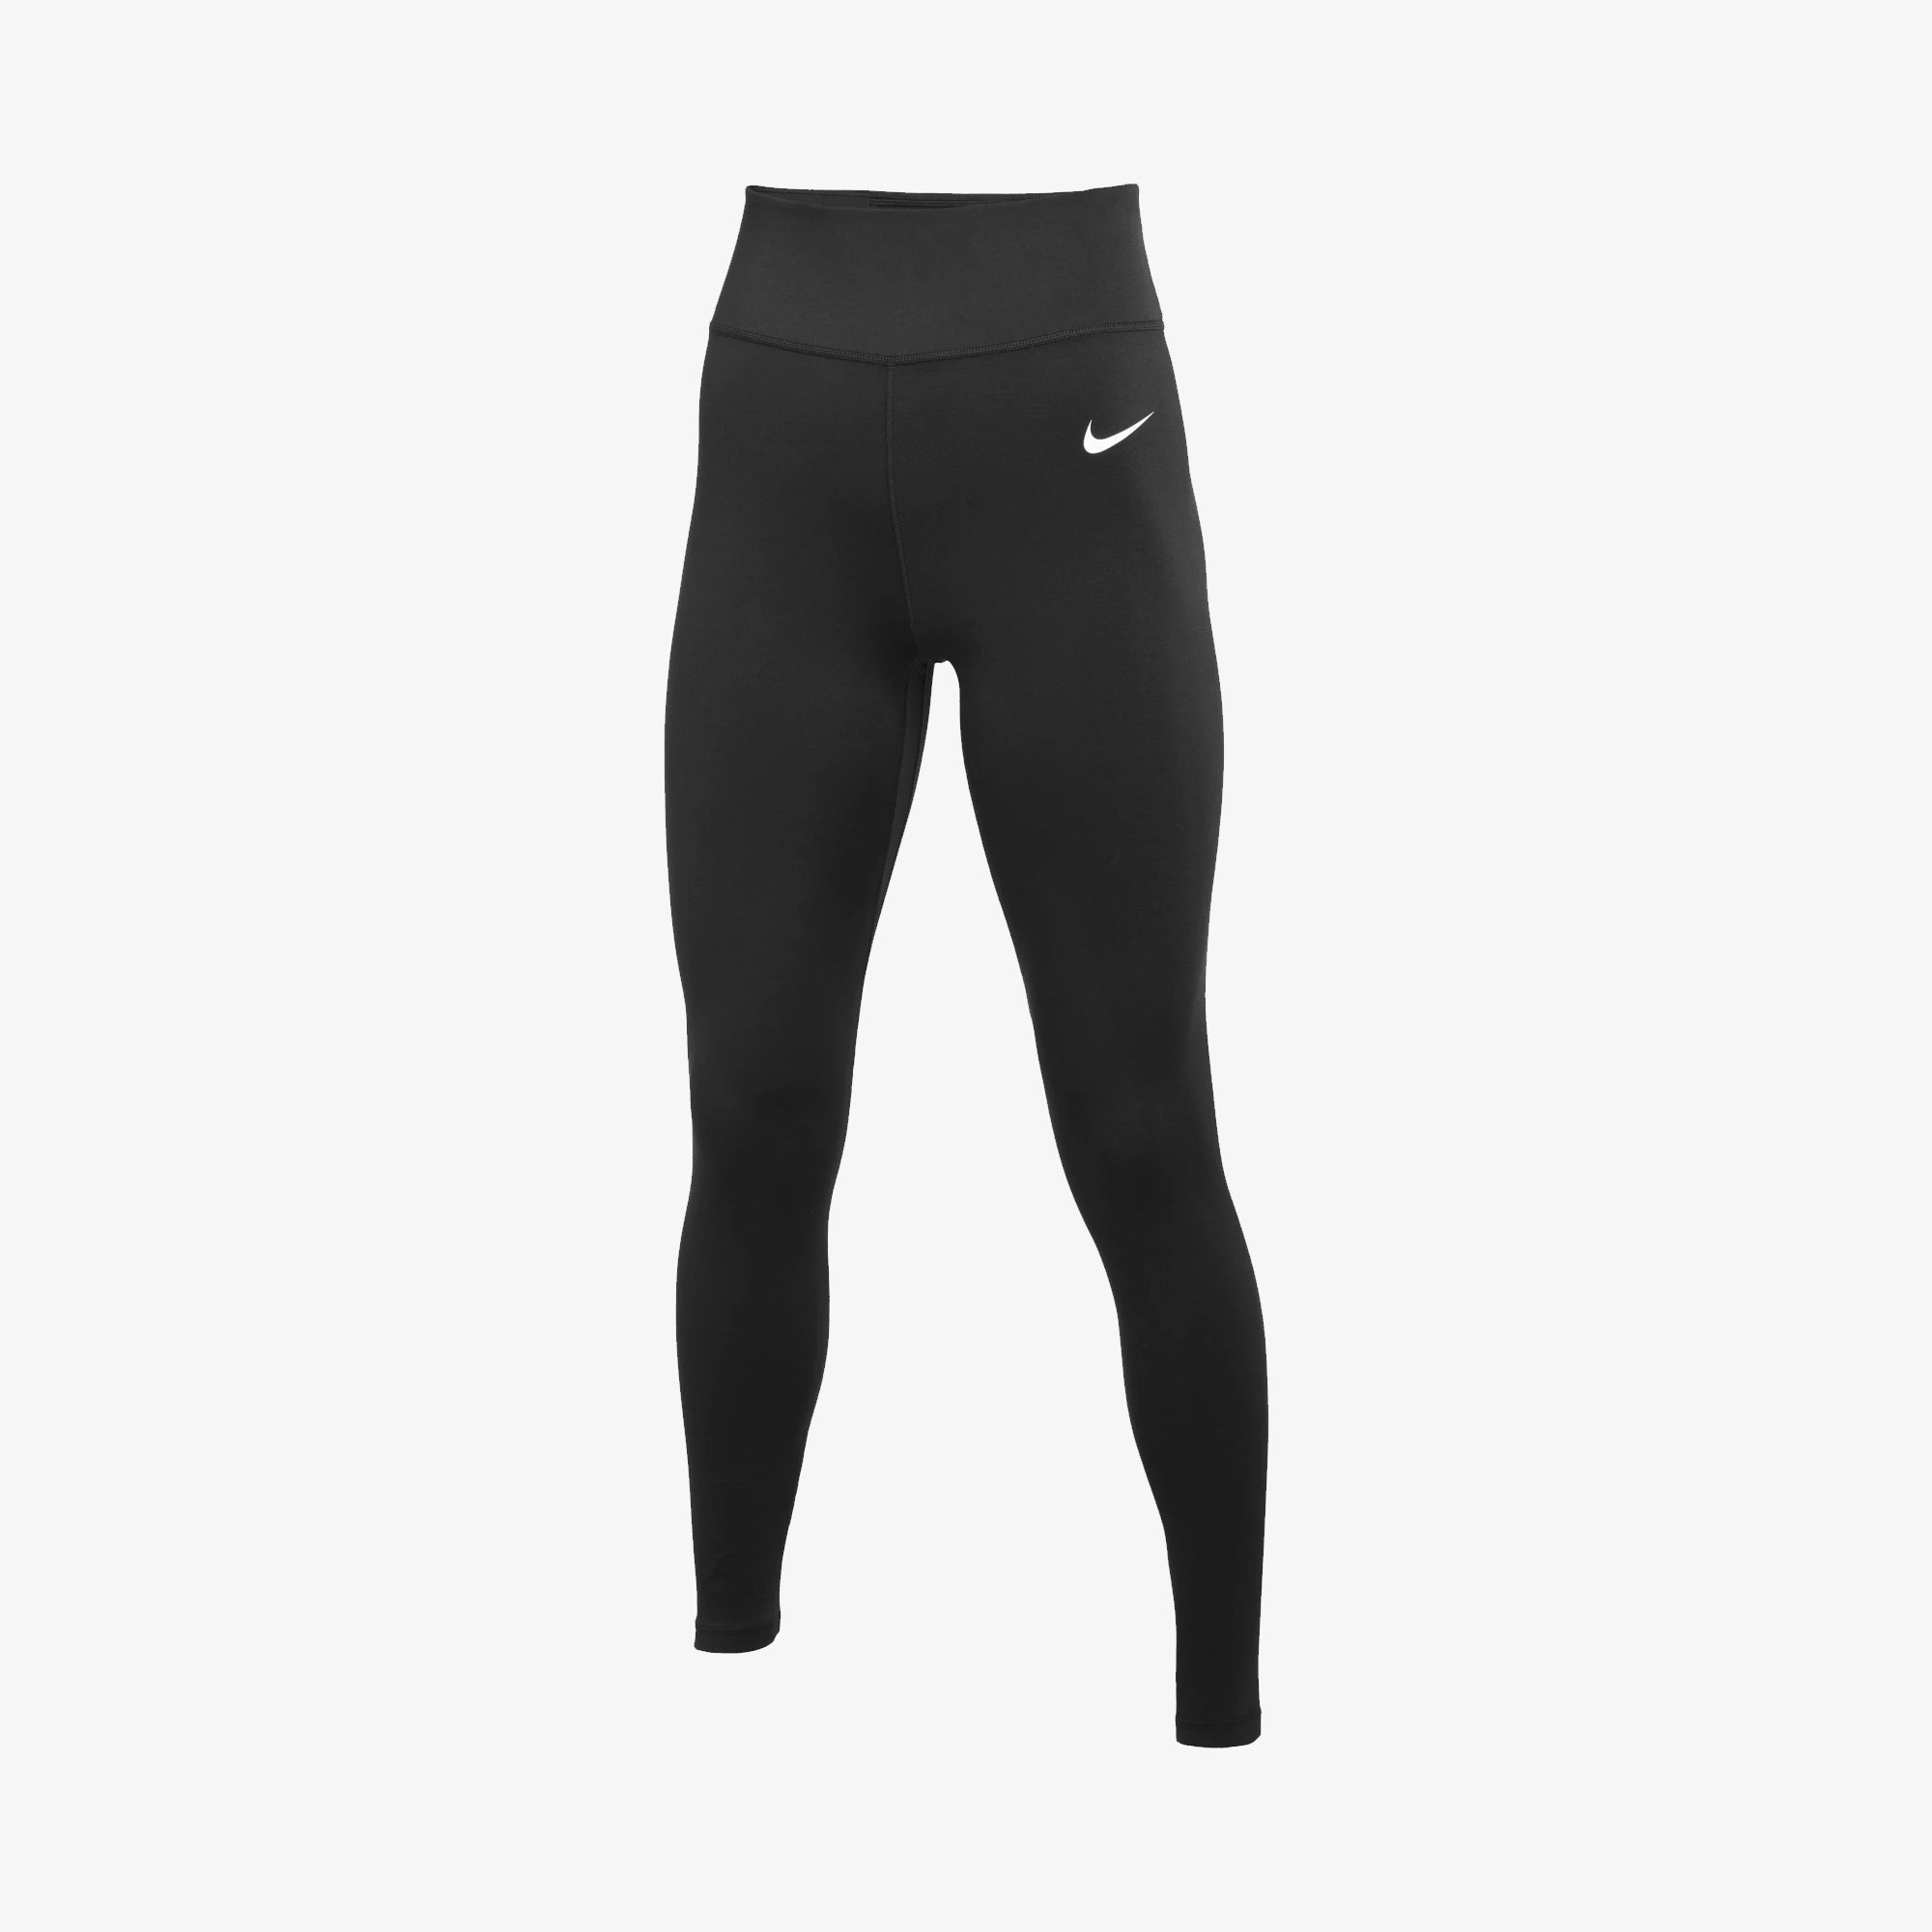 BNWT NIKE ONE Xs Leggings tight fit mid rise Rrp £49.99 £9.99